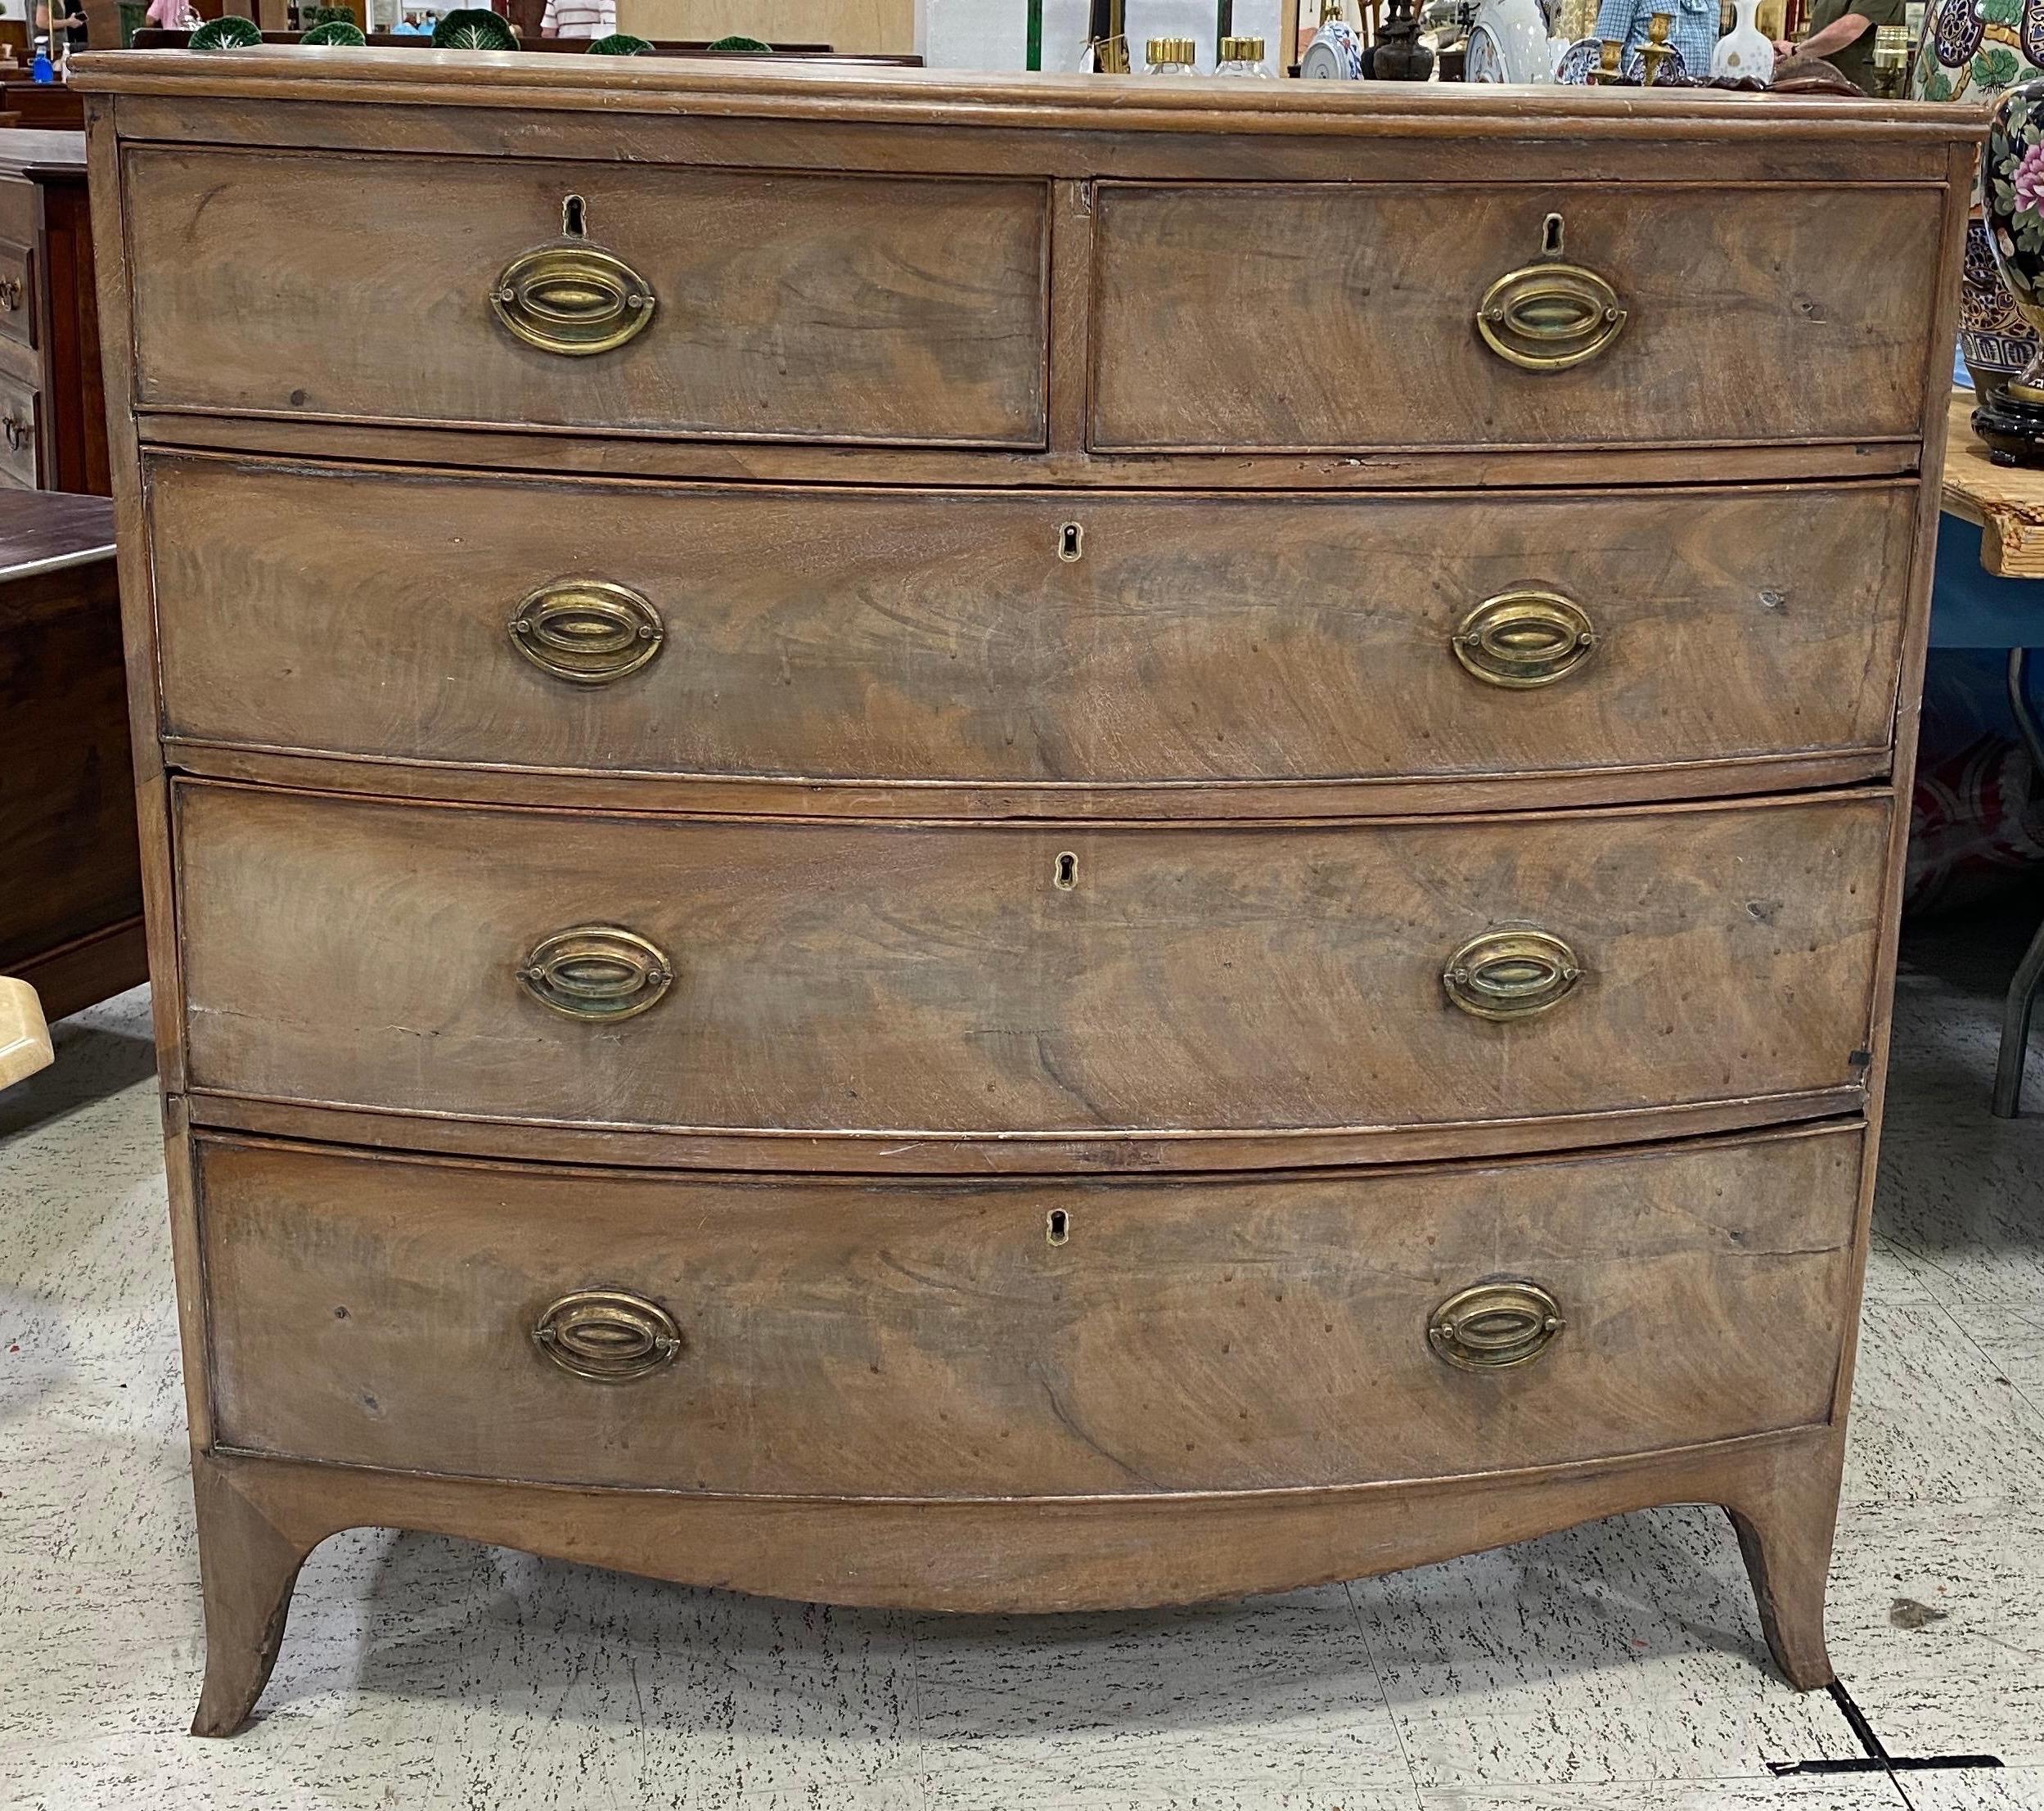 Great color on this 19th century bleached English mahogany bowfront chest of drawers. 2 drawers over 3, resting on bracket feet.